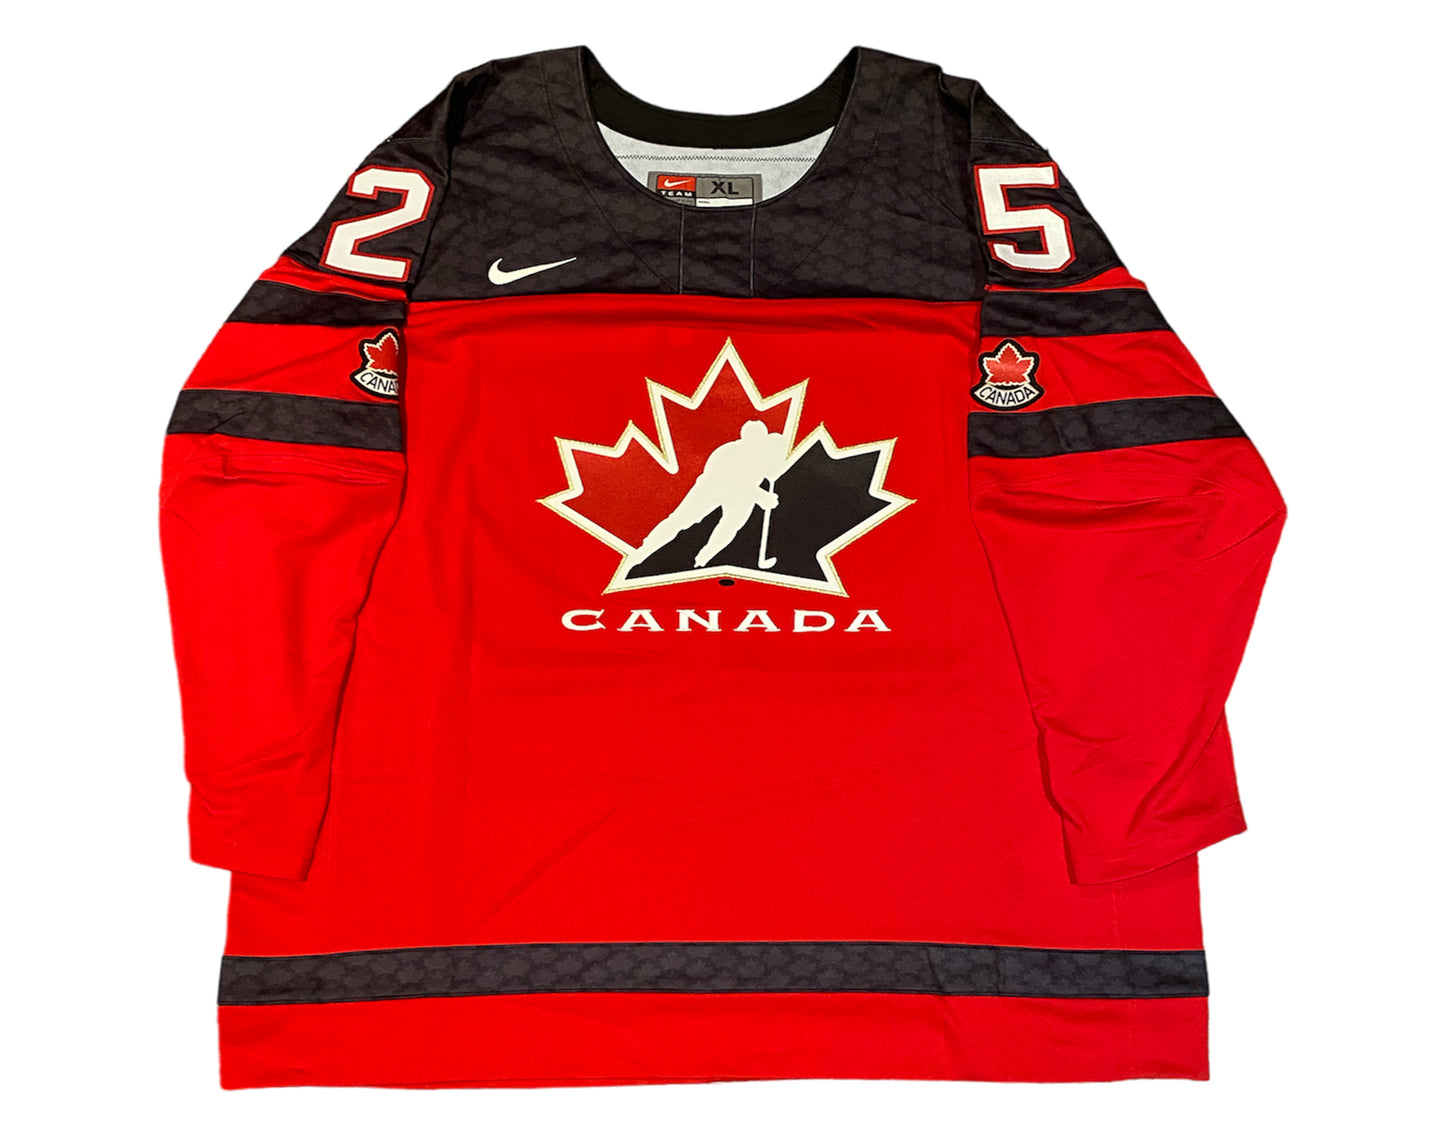 Jordan Kyrou Autographed Team Canada Home Red Nike Jersey Inscribed "2018 WJC Gold"